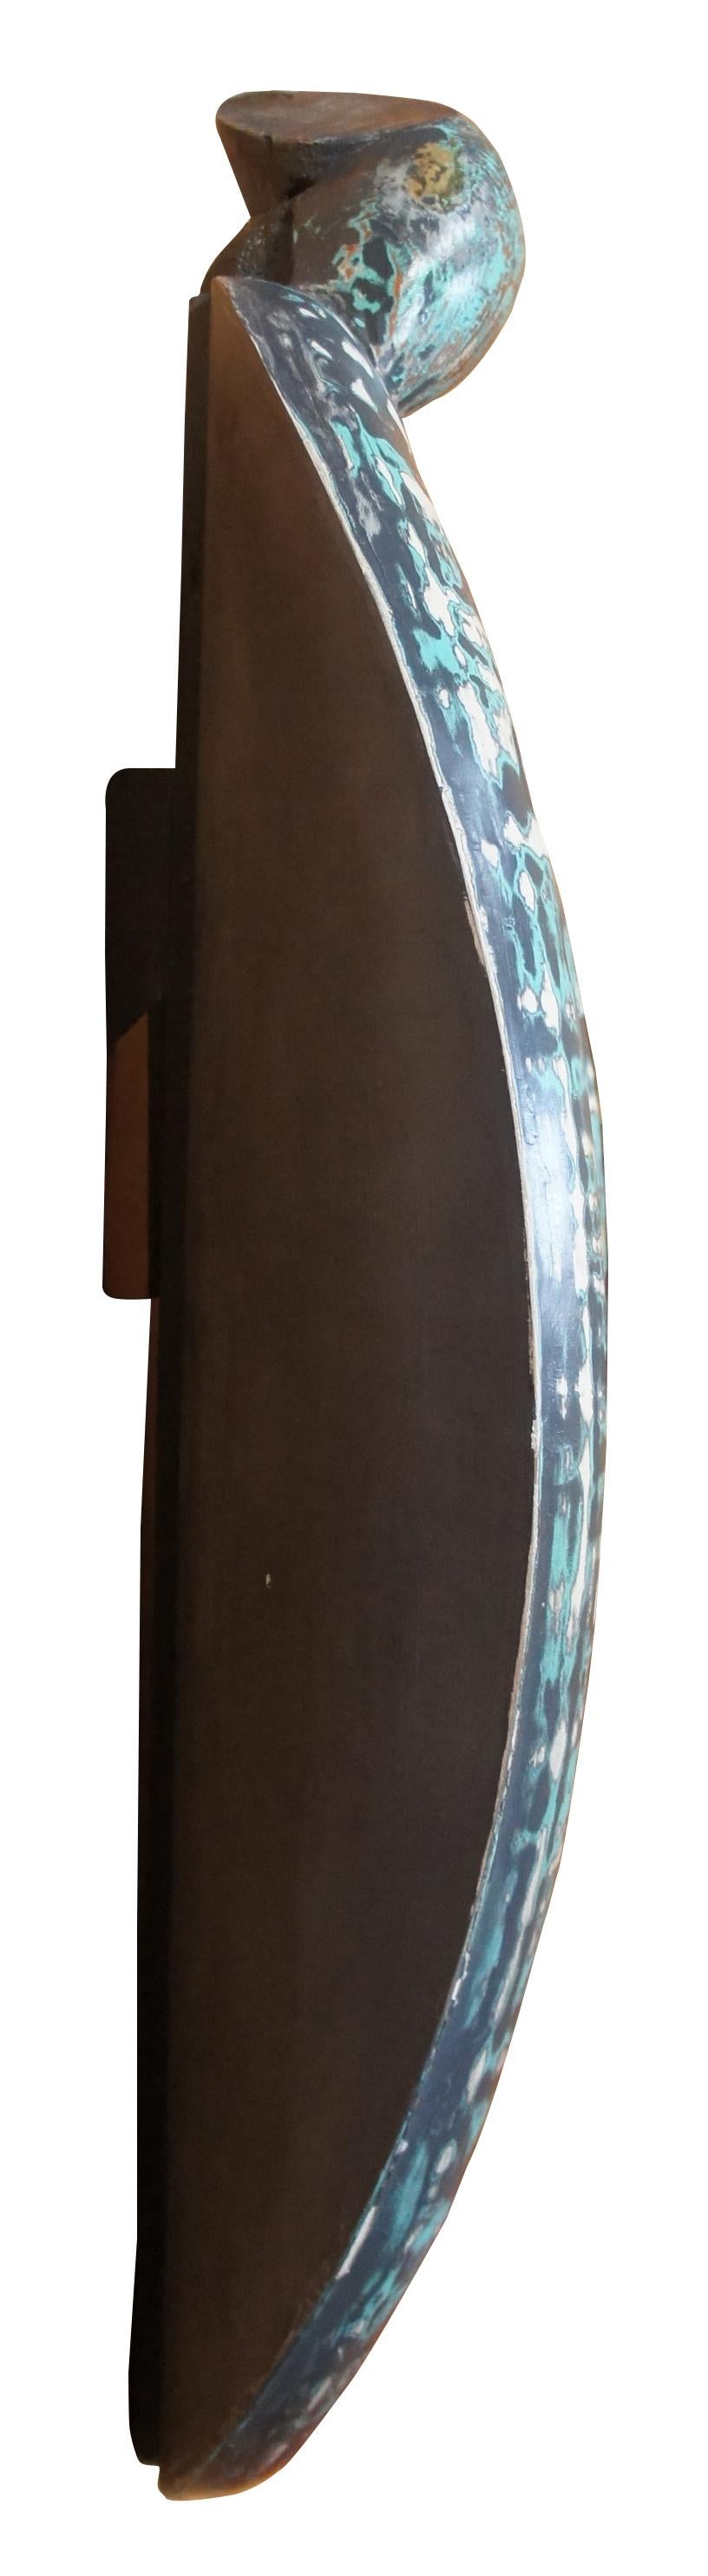 1991 Jack Carter Hand Carved and Painted Abstract Modern Wall Art Sculpture In Good Condition For Sale In Dayton, OH